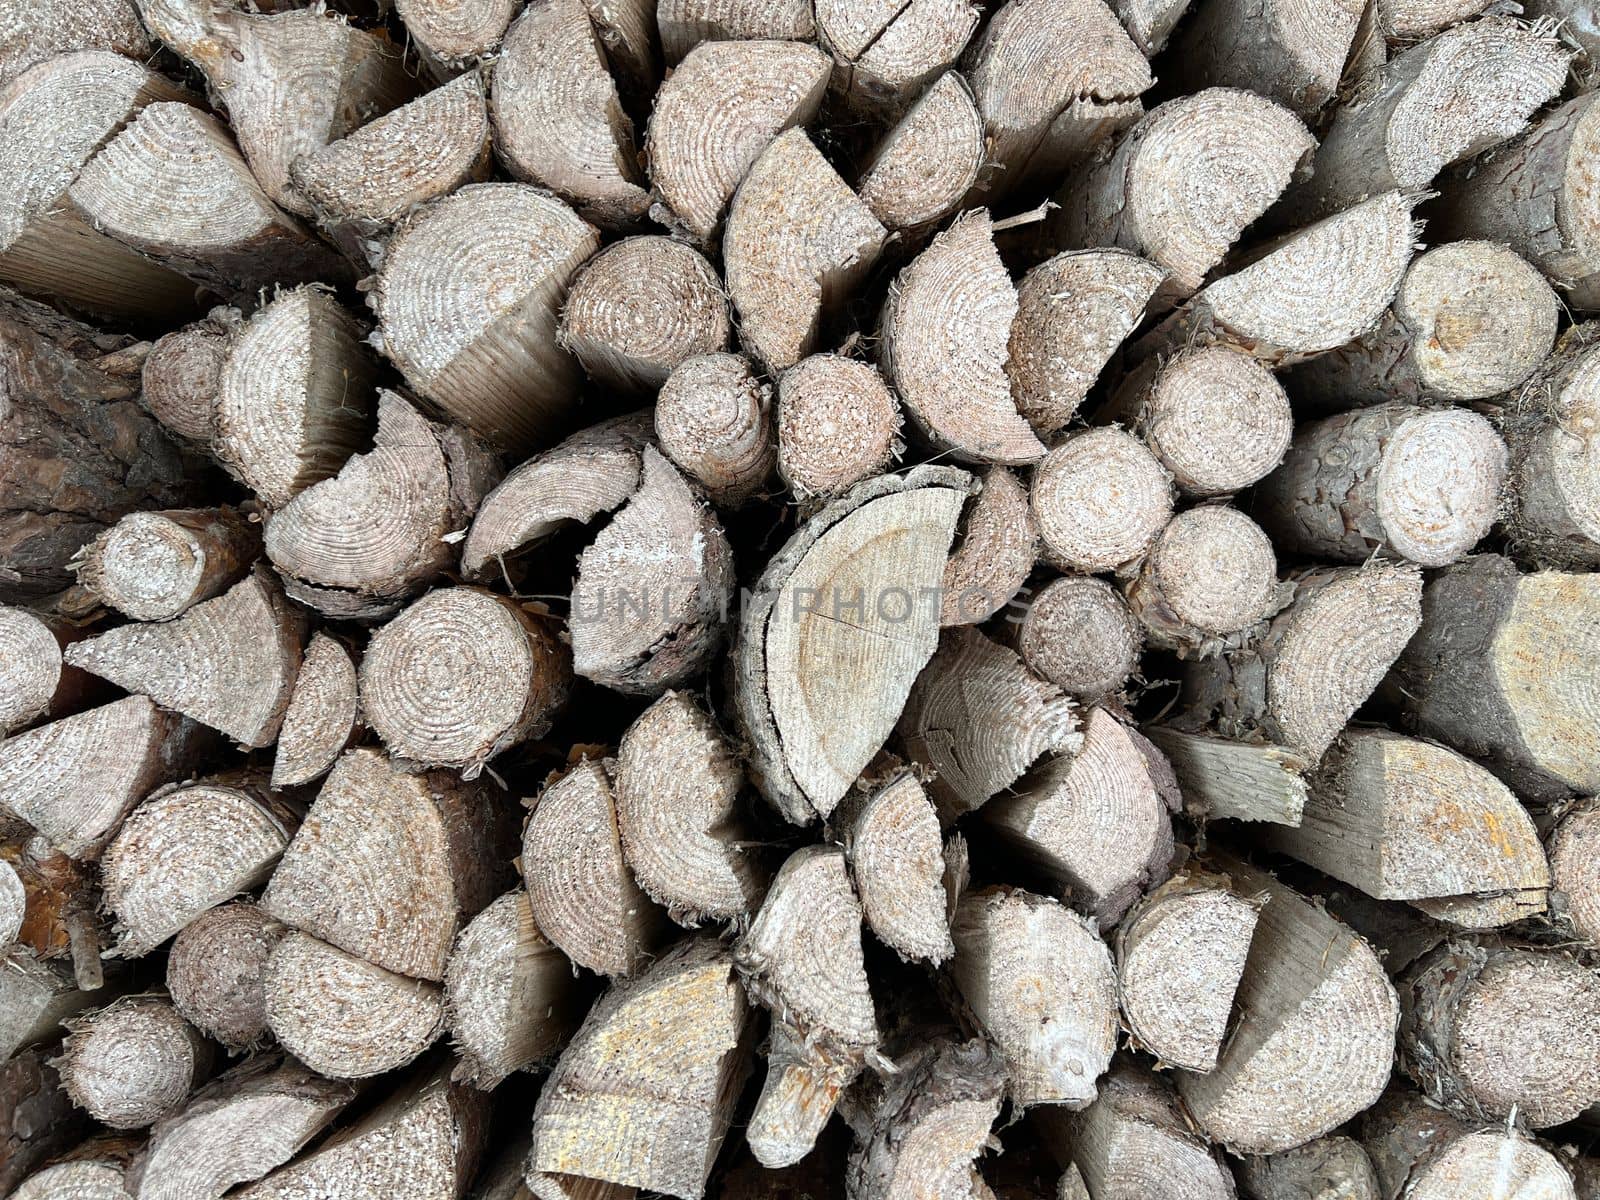 Natural wooden background - closeup of chopped firewood. Firewood stacked and prepared for winter. Wooden natural sawn logs as background